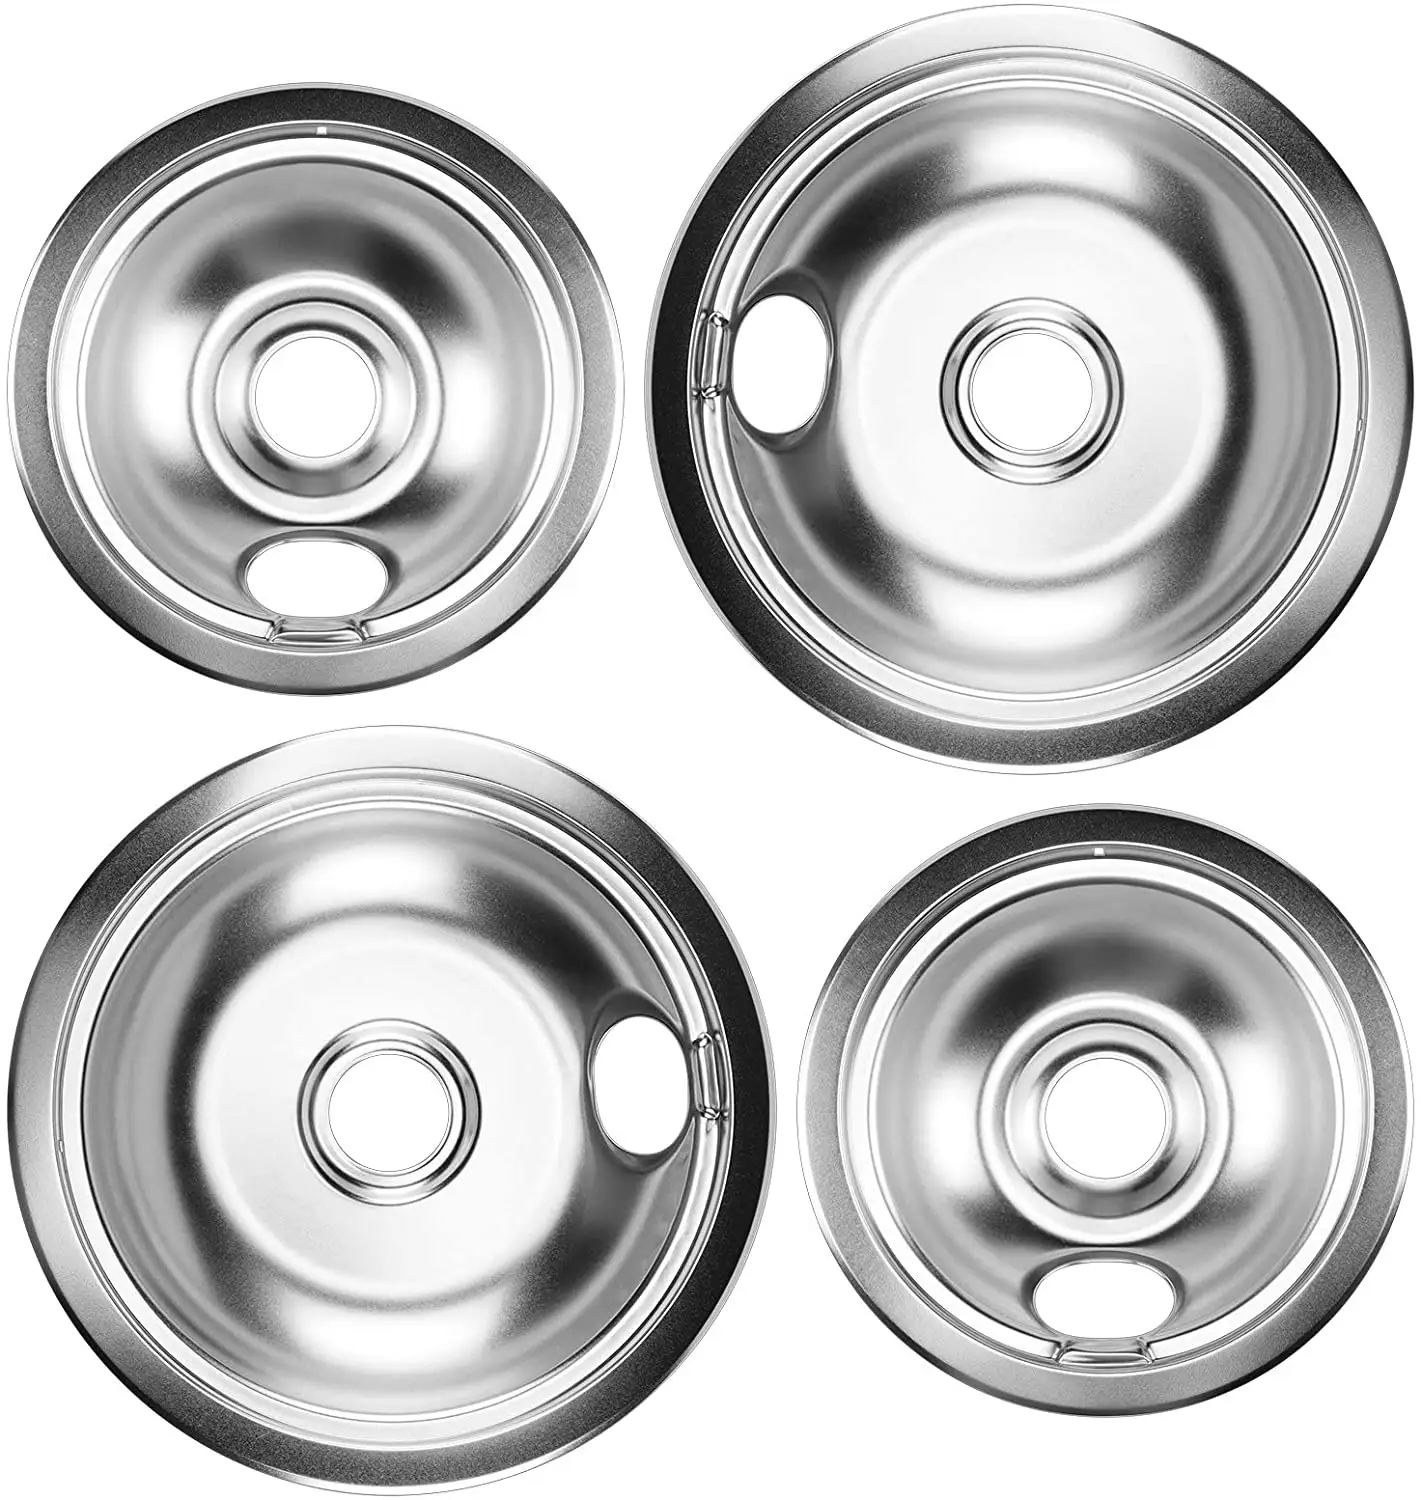 316048413 series drip bowl 8 inch 316048414 series drip bowl 6 inch chrome plated  suitable for electronic surface burner